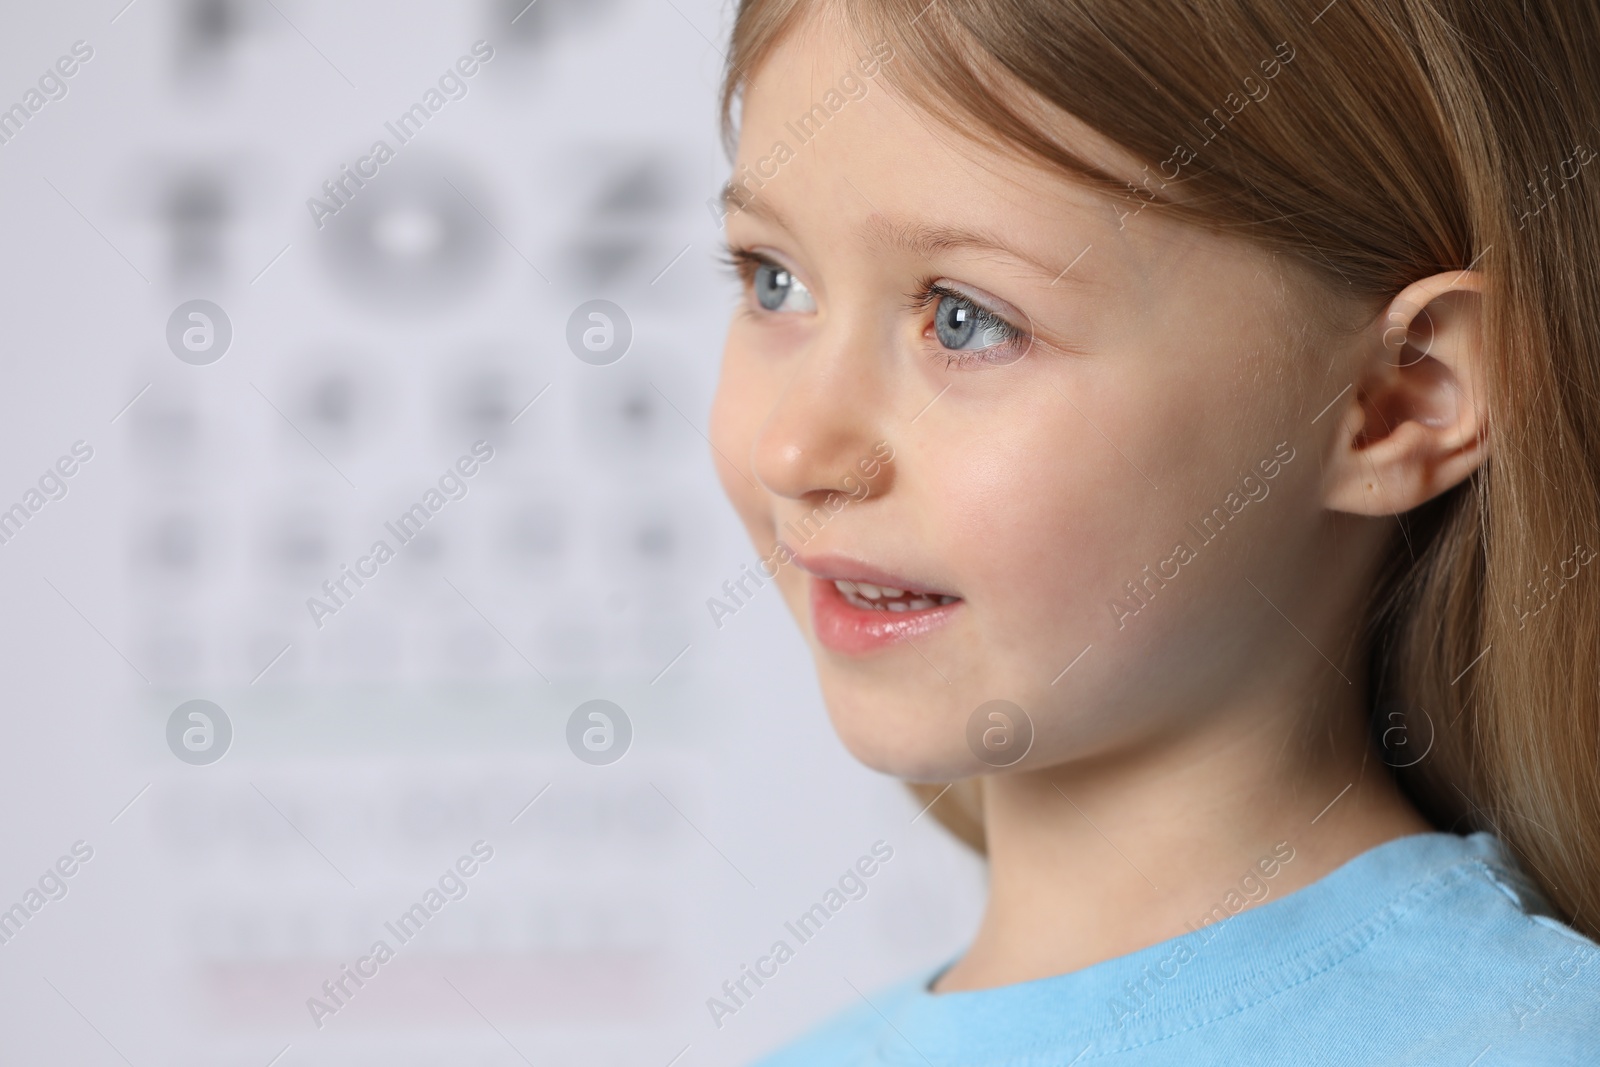 Photo of Cute little girl on blurred background, closeup